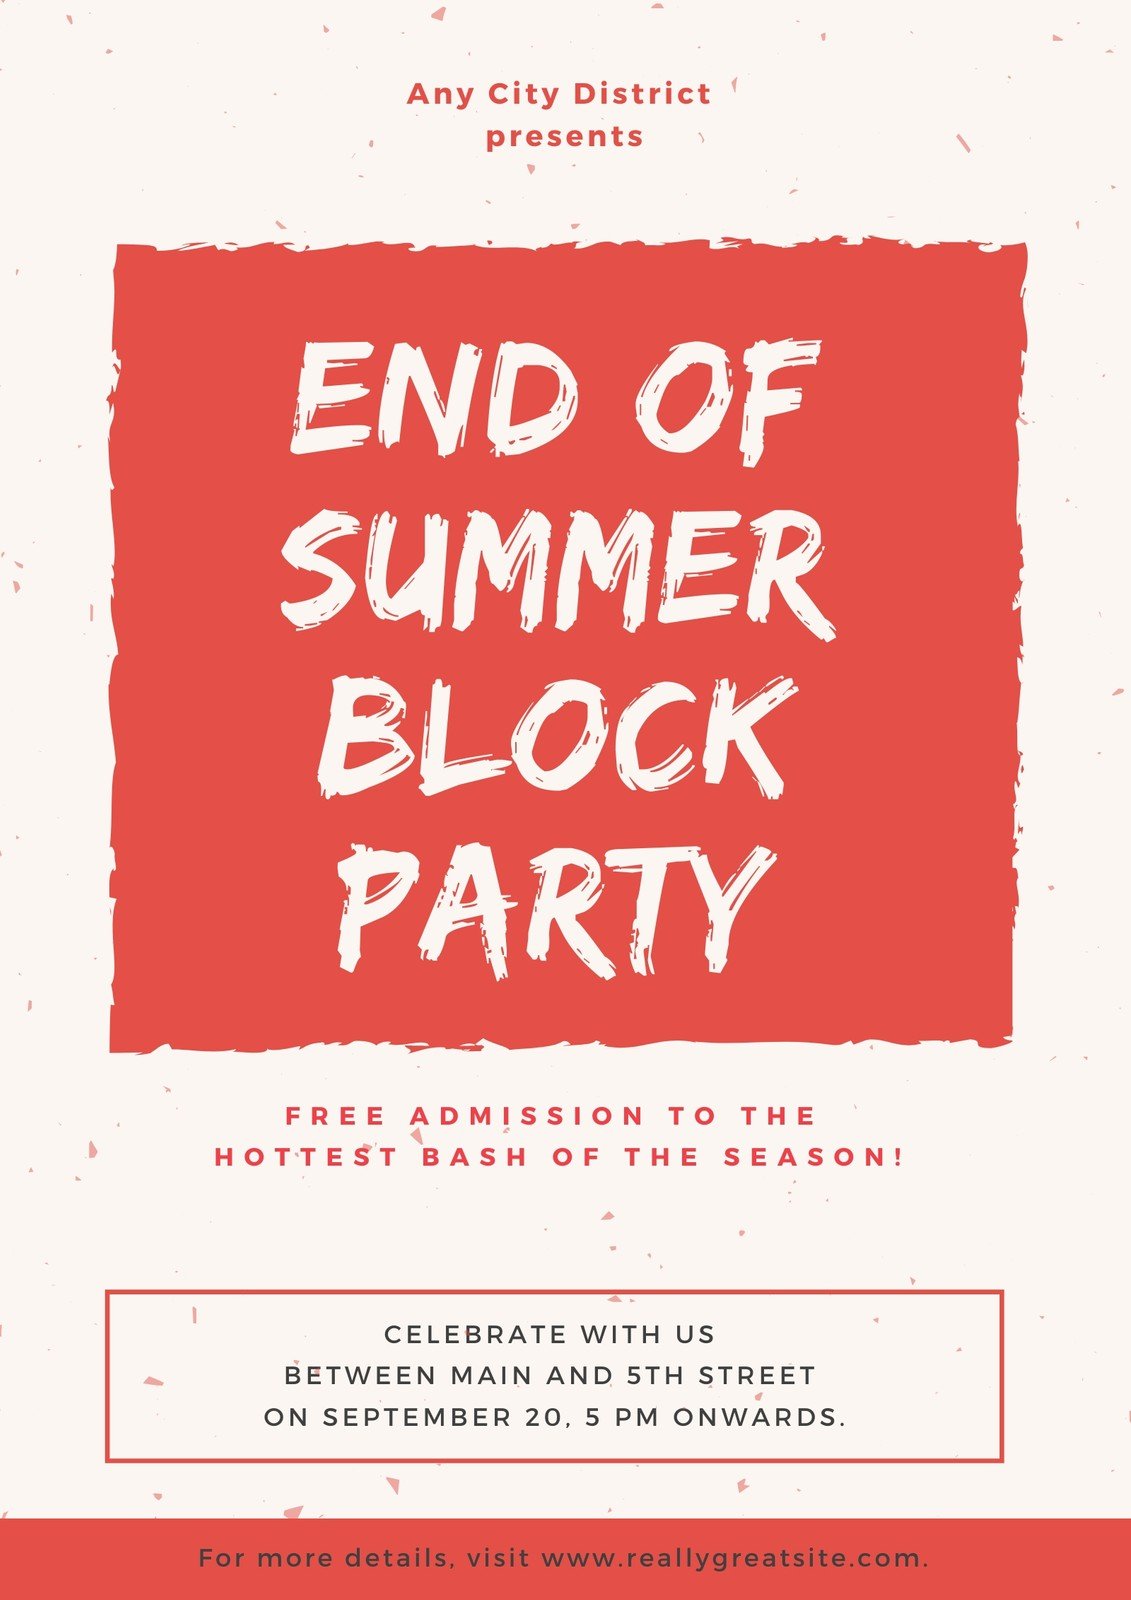 Customize 22+ Block Party Posters Templates Online - Canva Regarding Block Party Template Flyers Free